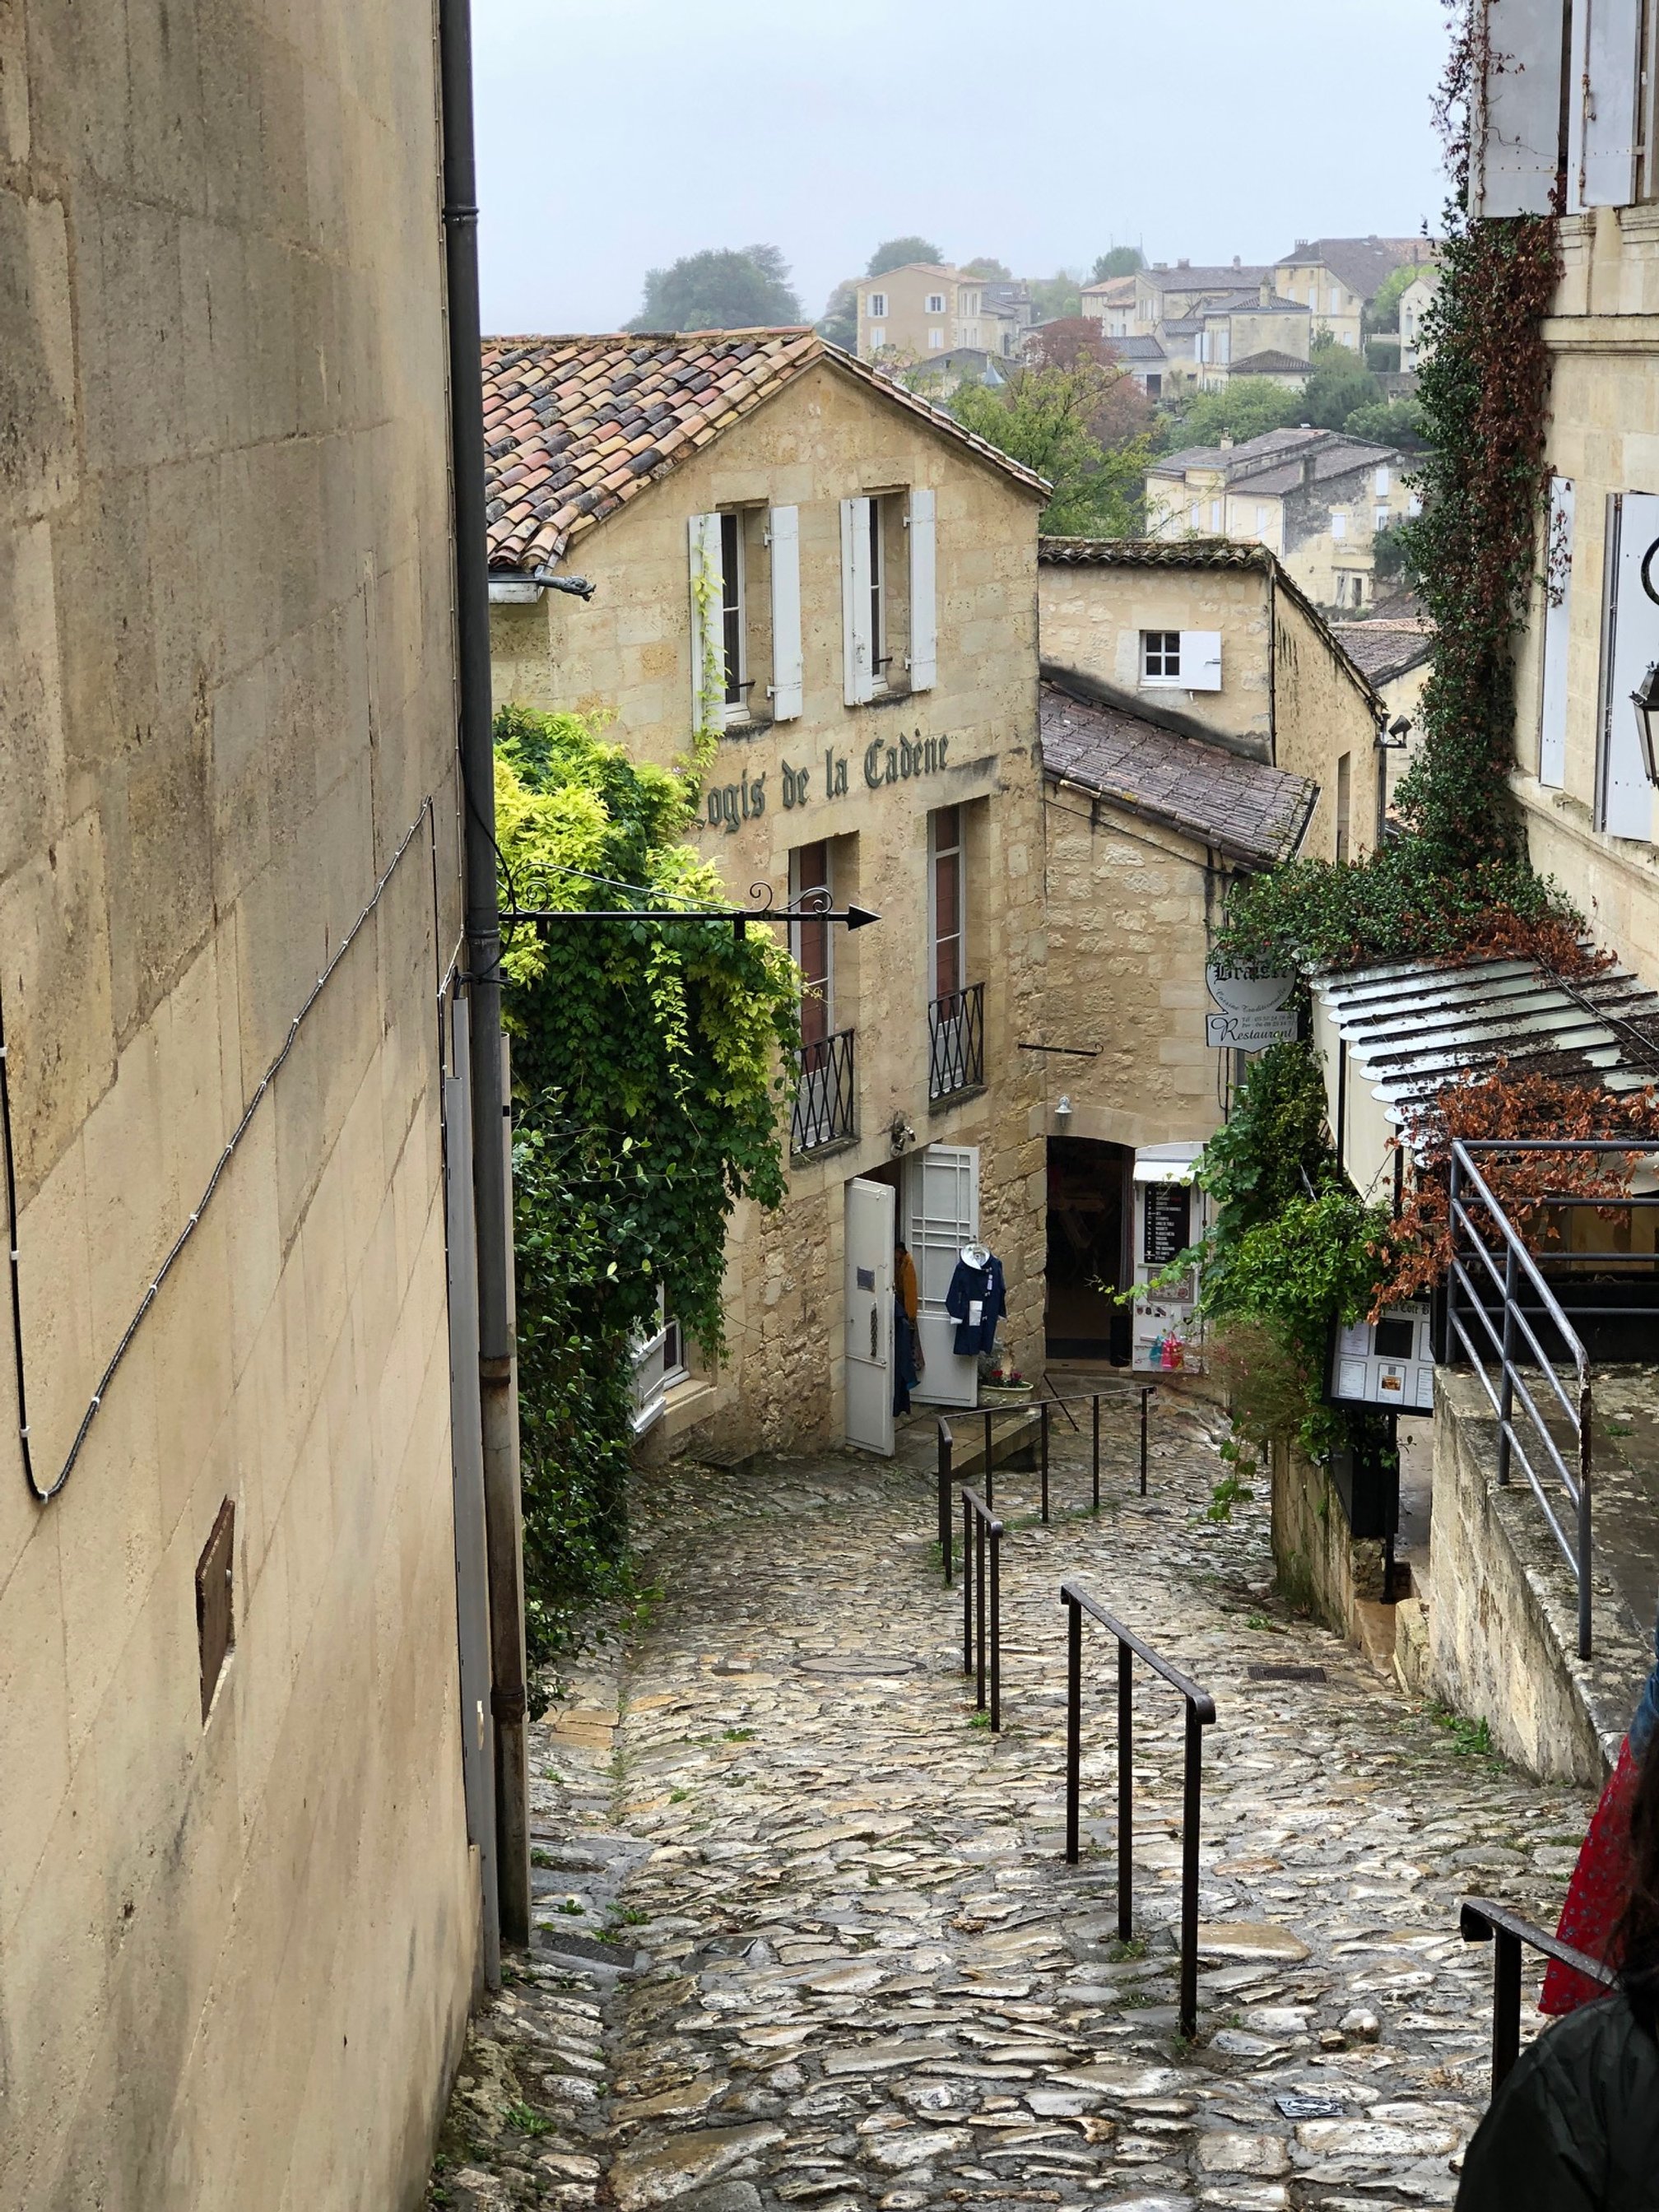  The old town has these amazing, narrow streets and steep hills. 